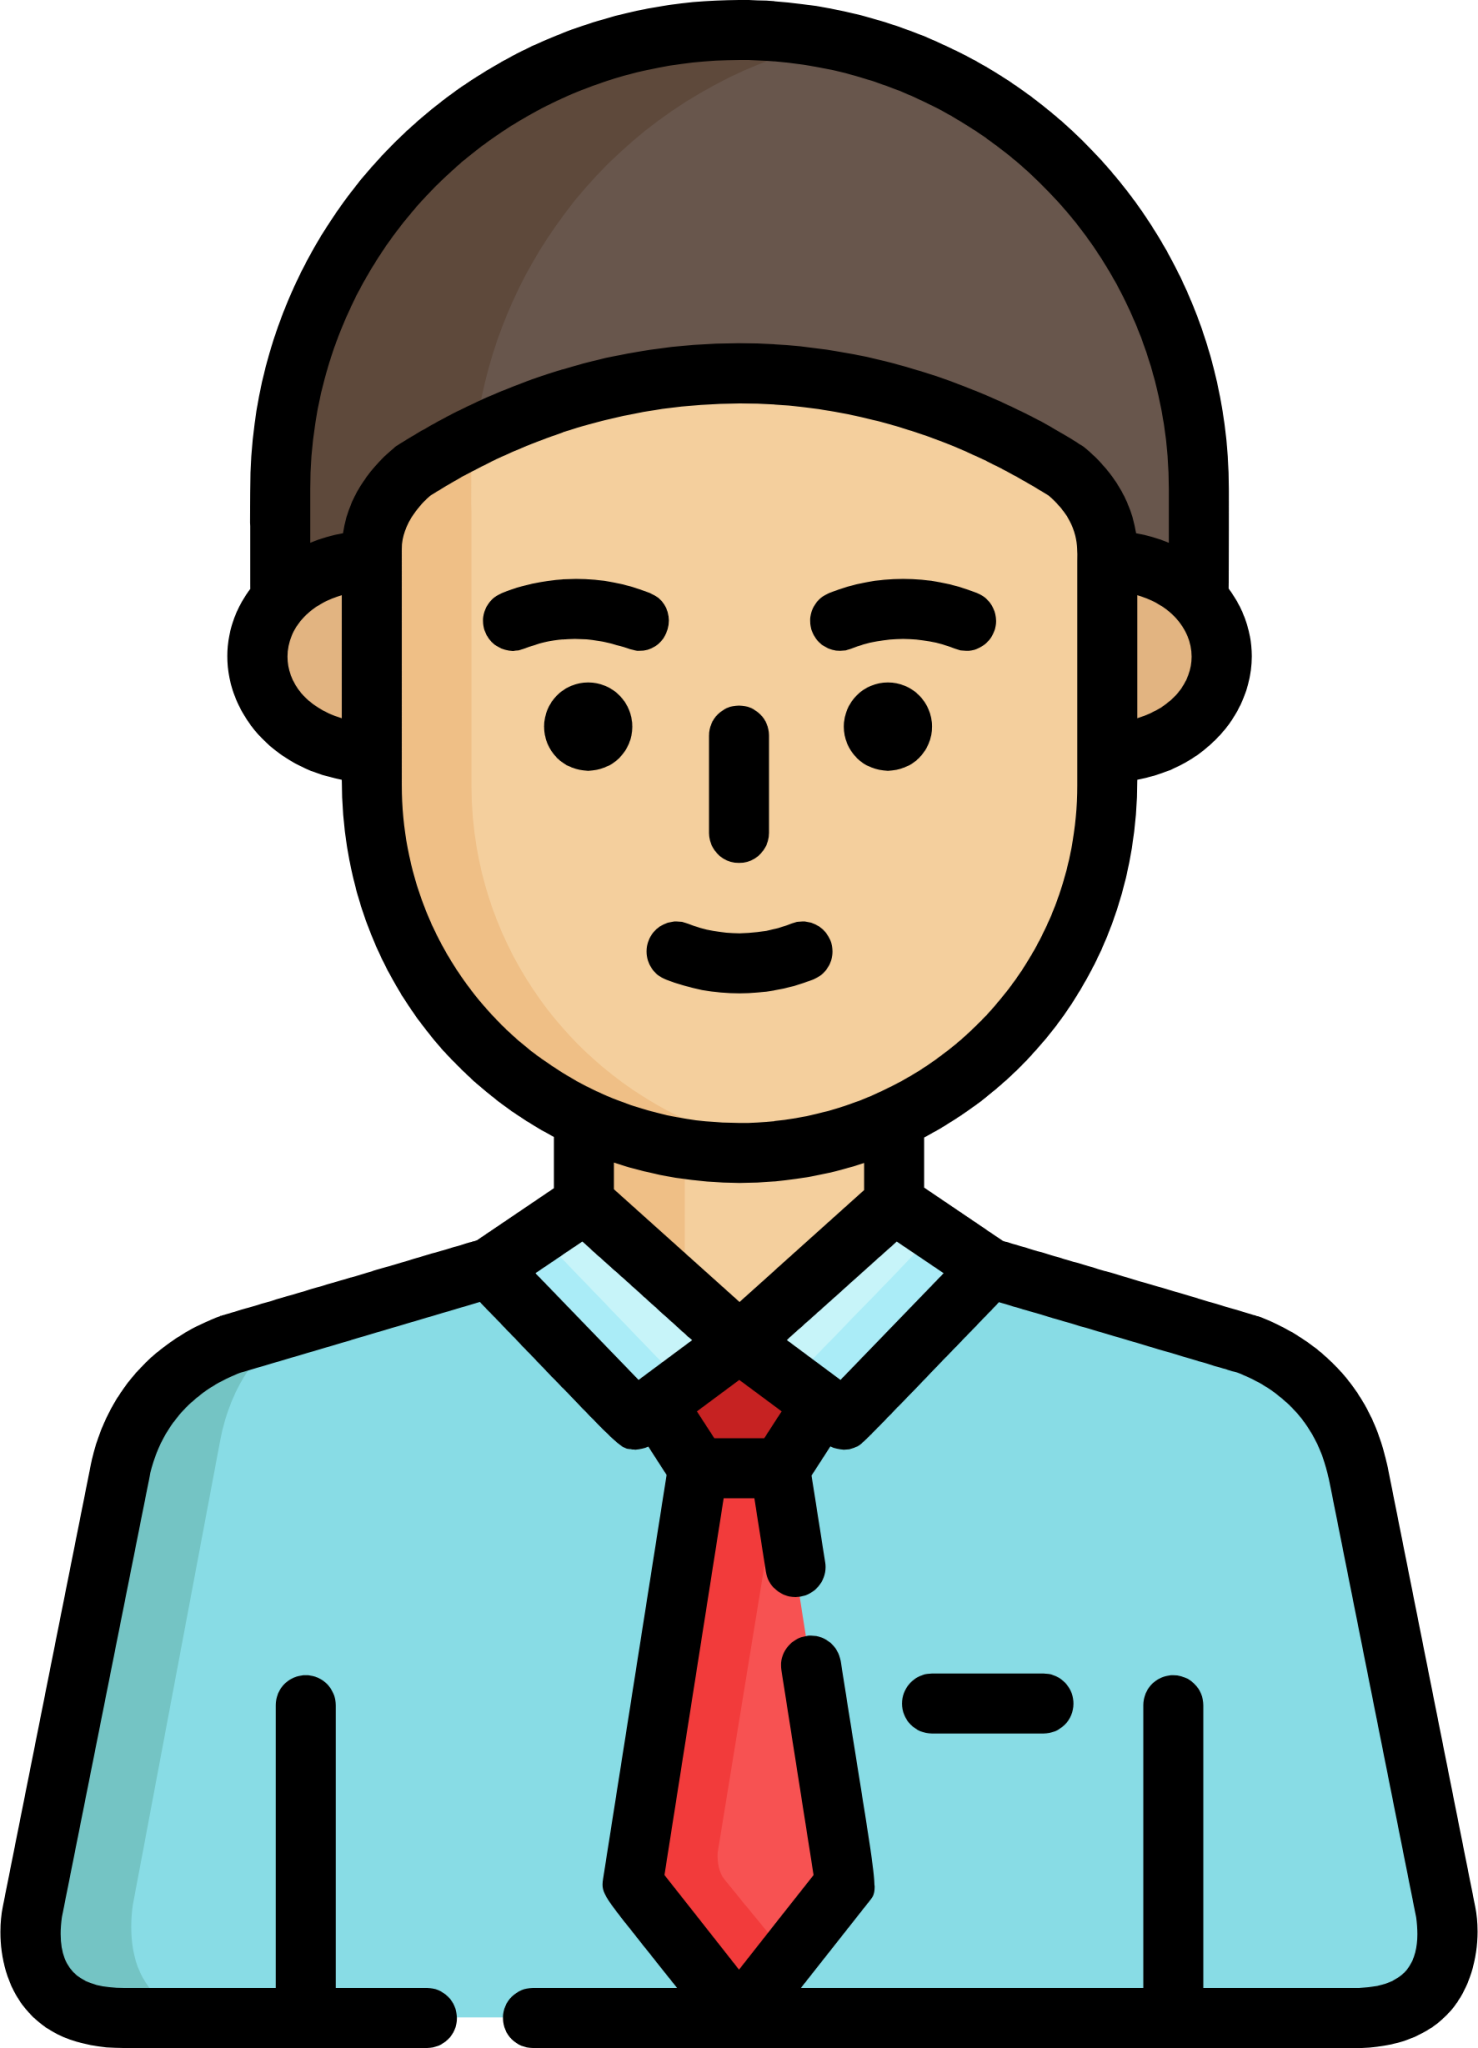 worker icon png